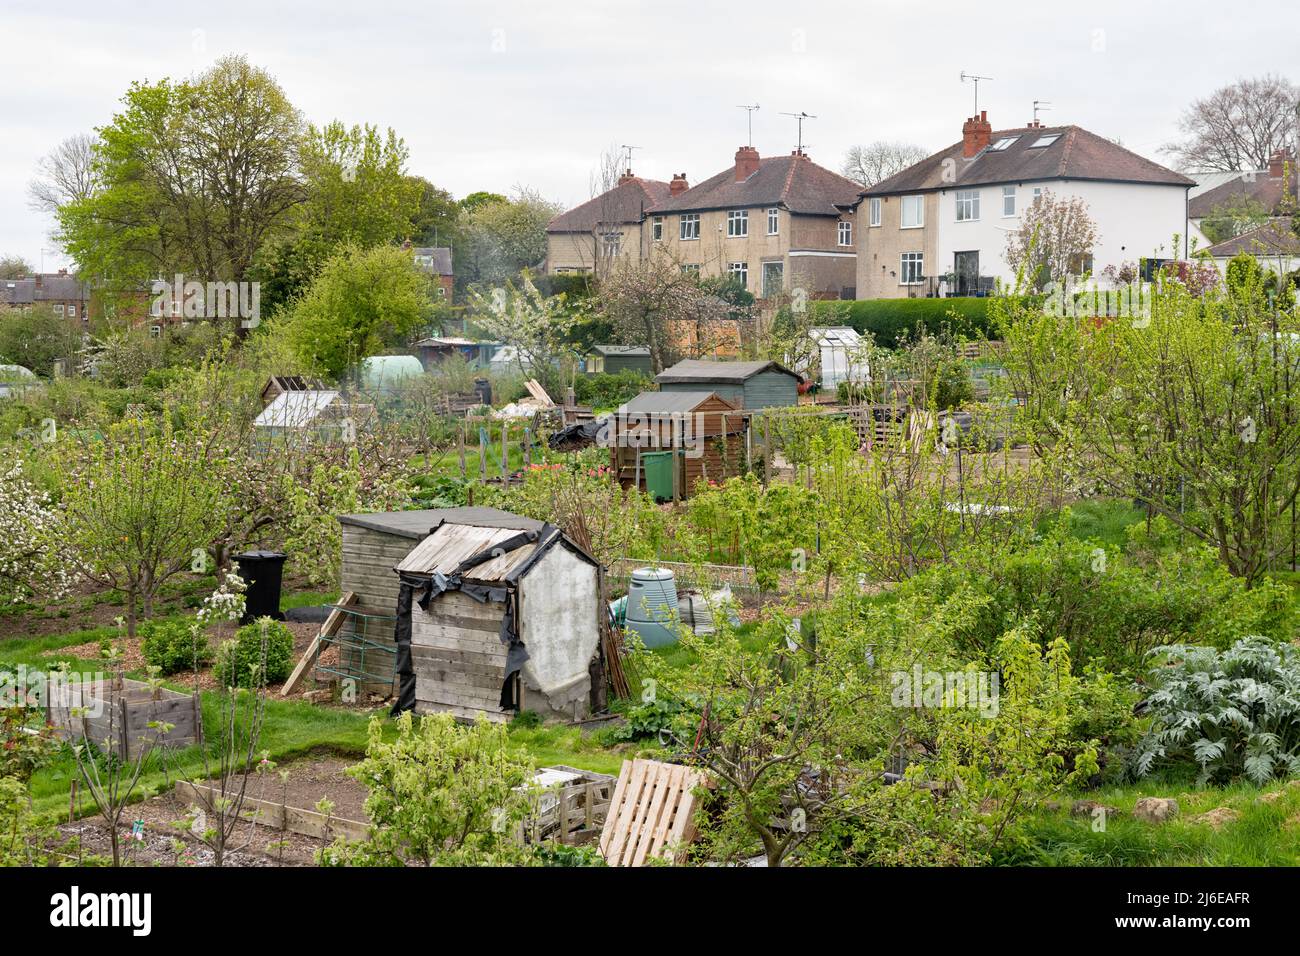 Allotments in UK - Gledhow Valley allotments con tipica casa a schiera in Chapel Allerton, Leeds, Inghilterra Foto Stock